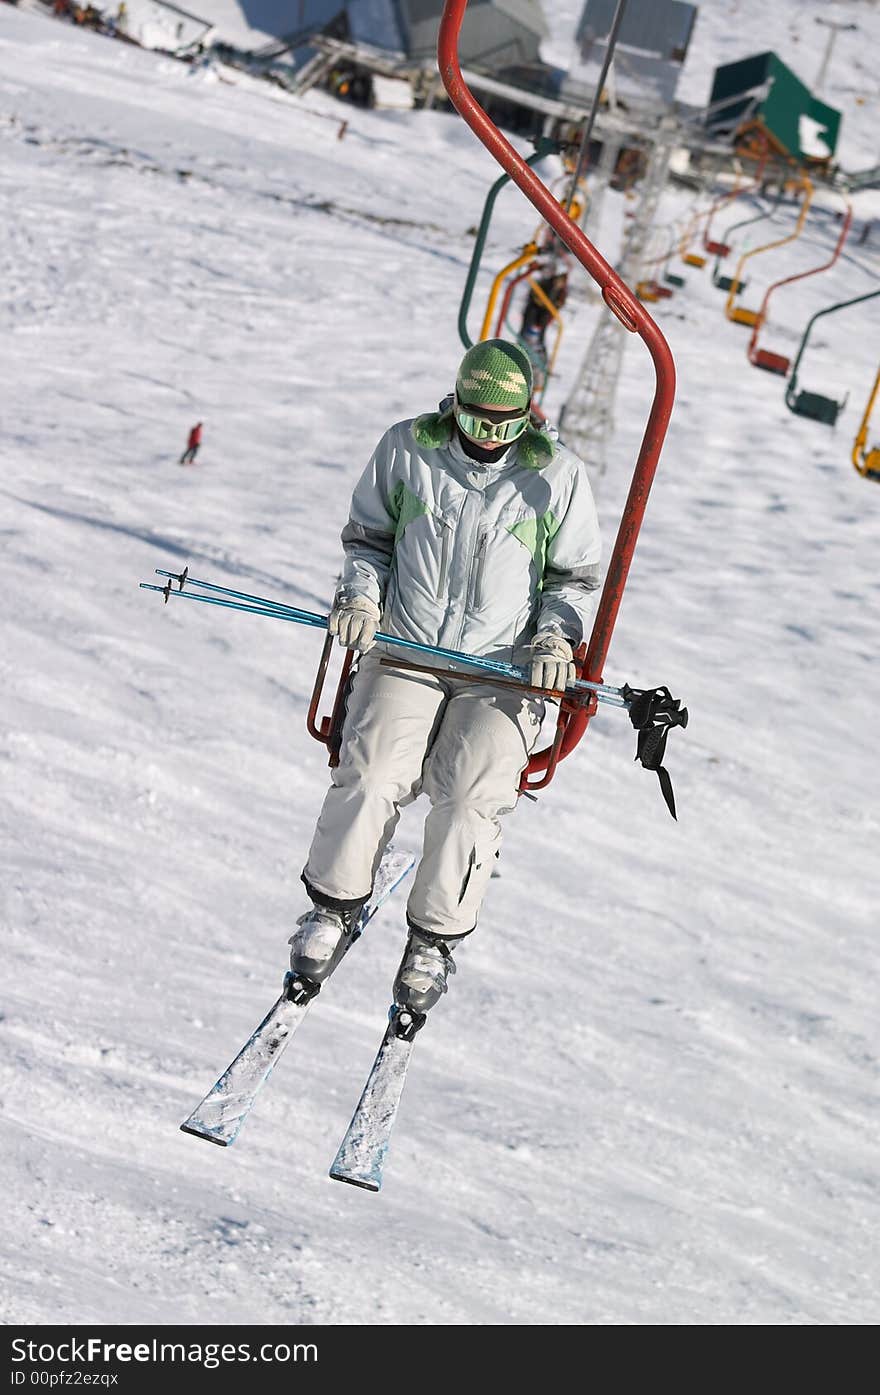 Skier on chair lift in mountain resort